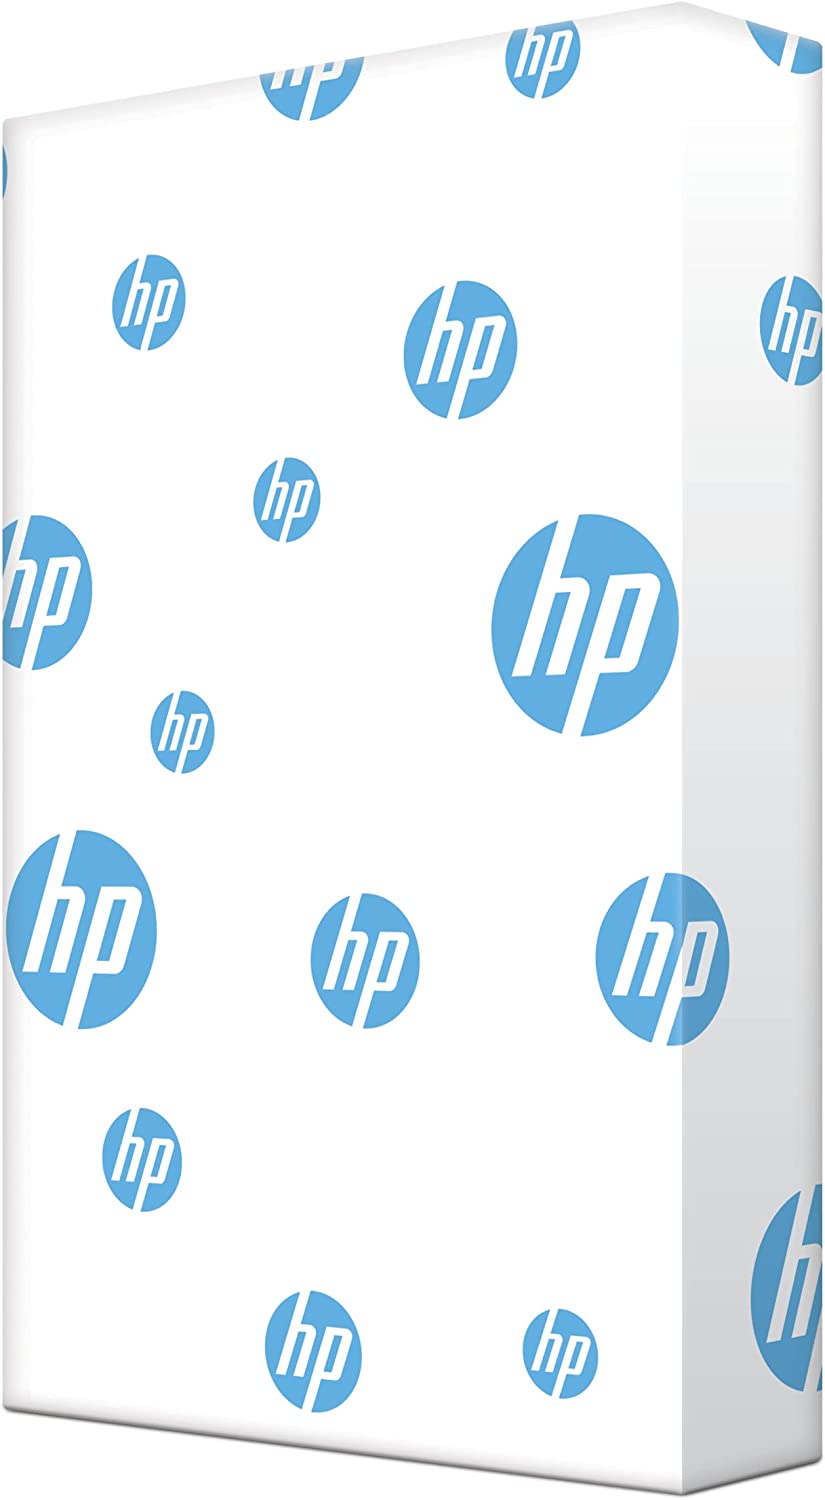 HP Printer Paper Office 20lb, 8.5x 11, 3 Ream Case, 1,500 Sheets, Made in  USA From Forest Stewardship Council (FSC) Certified Resources, 92 Bright